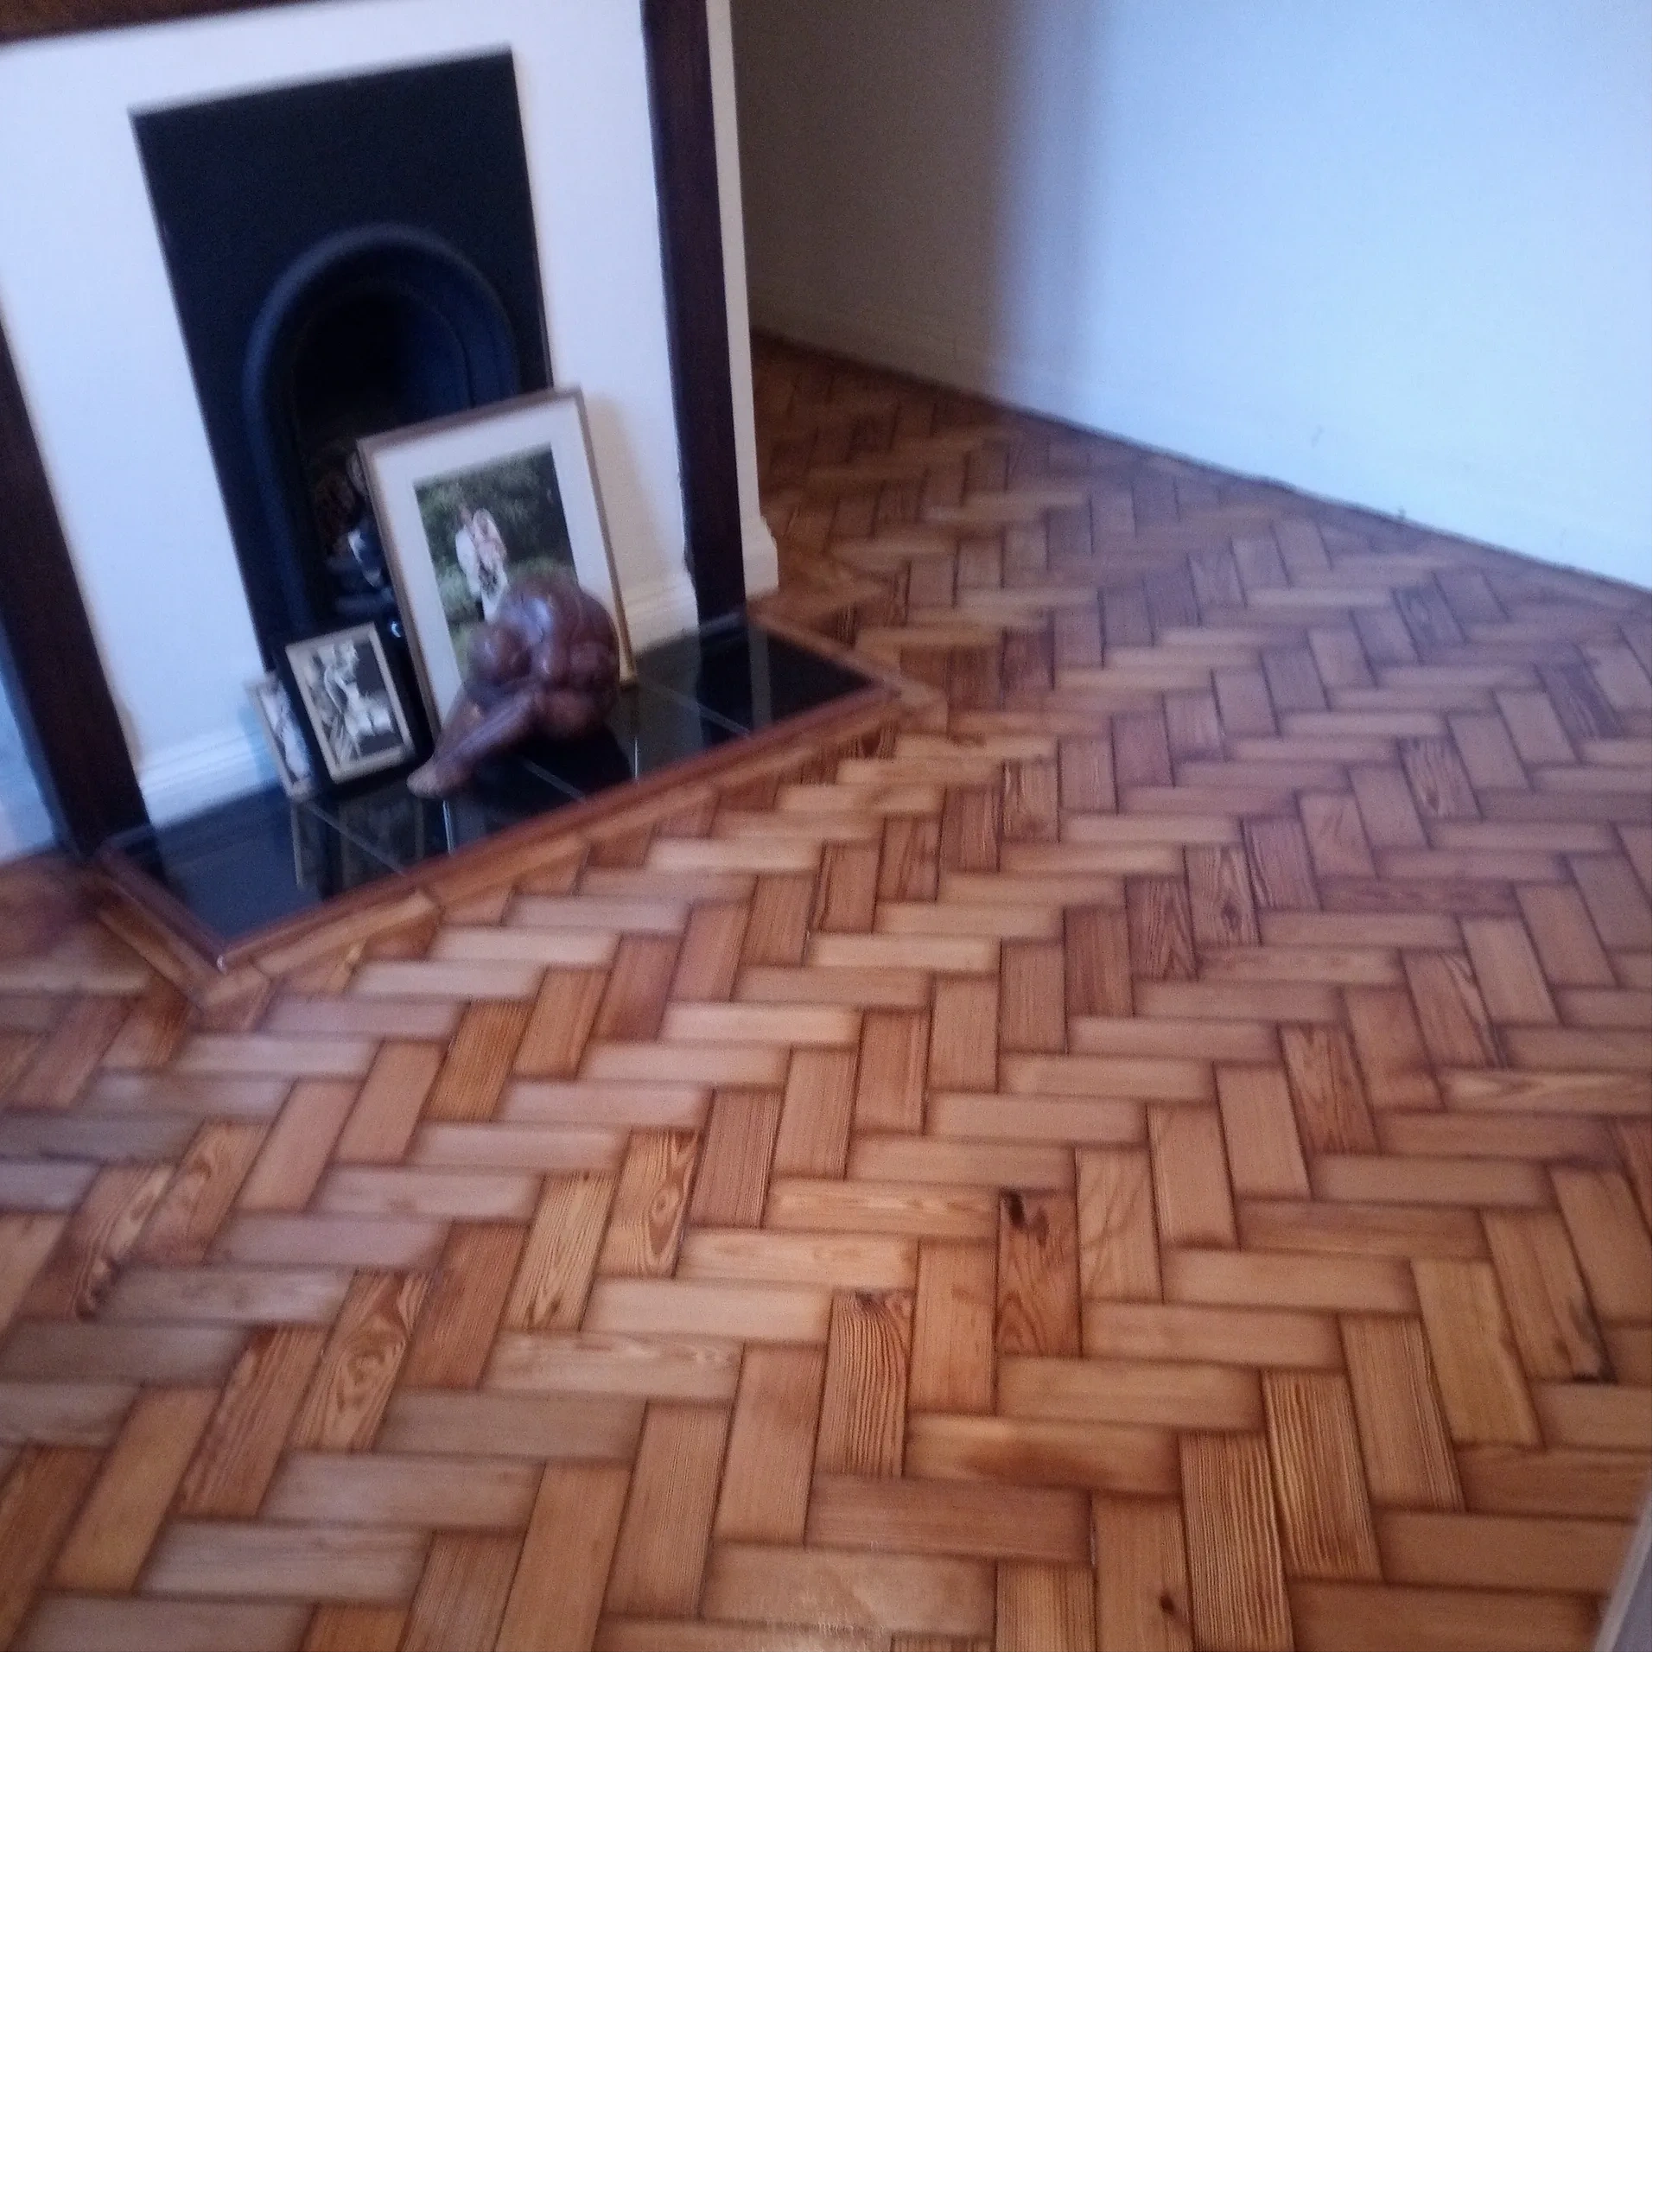 Badly damaged parquet repaired and oiled